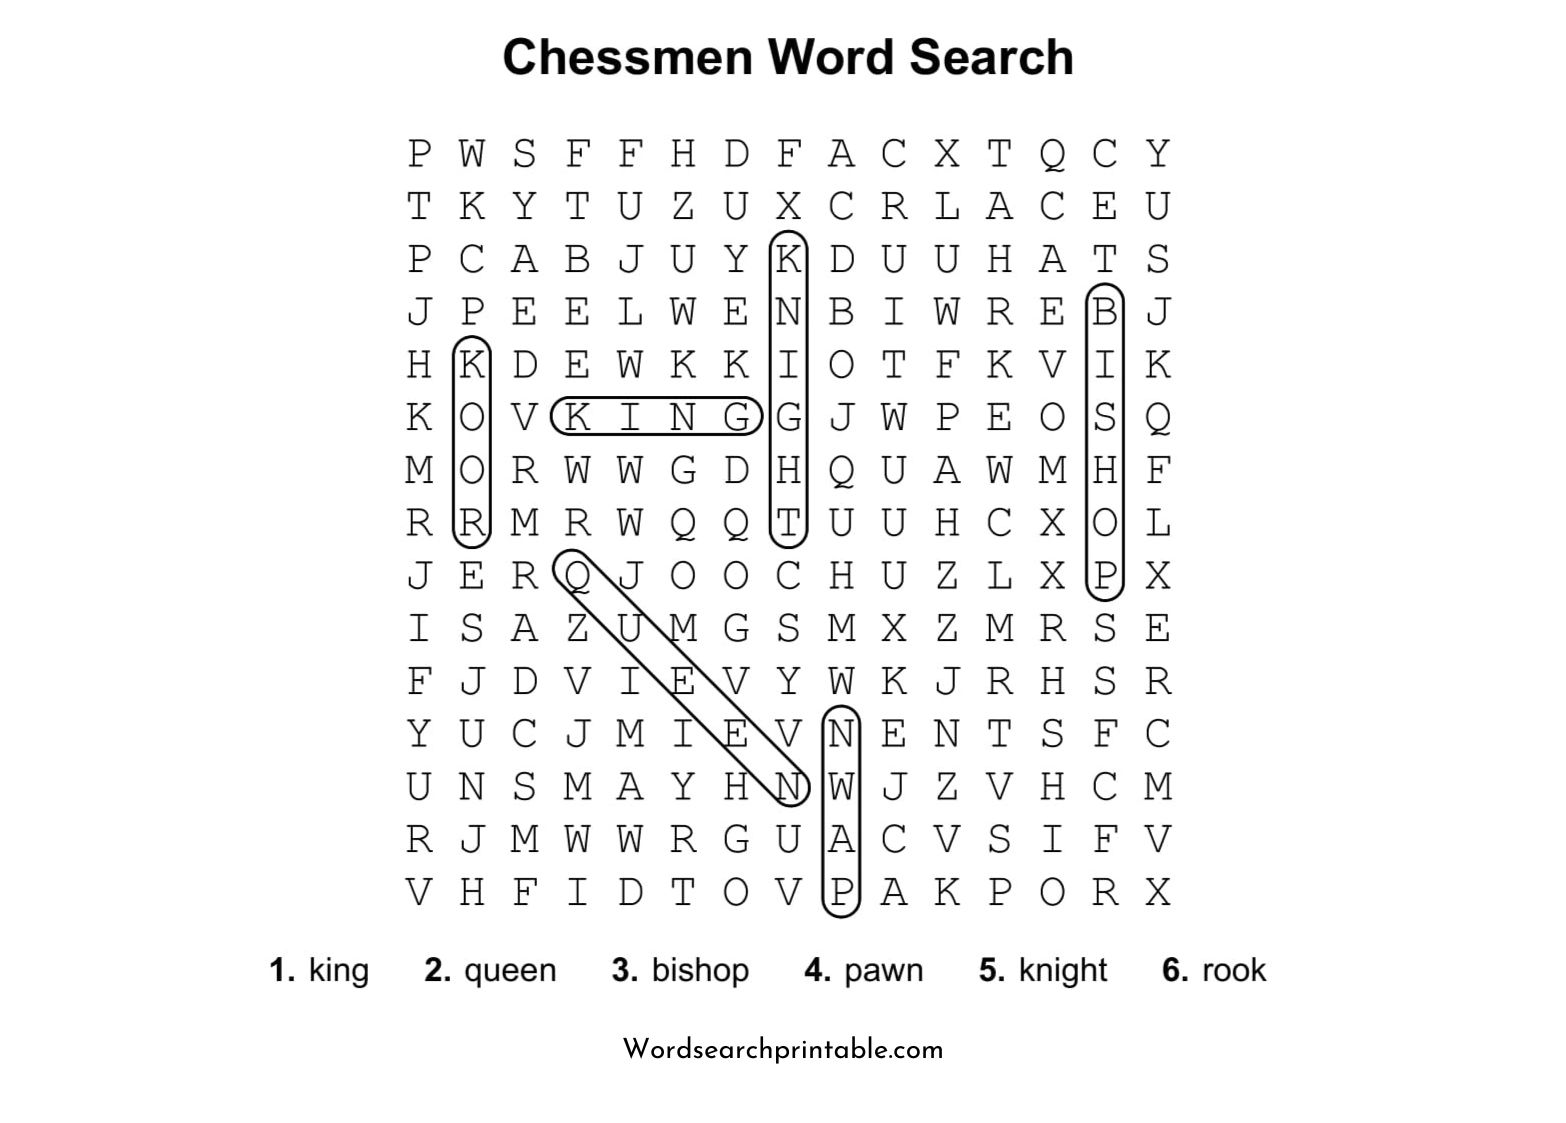 chessmen word search puzzle solution